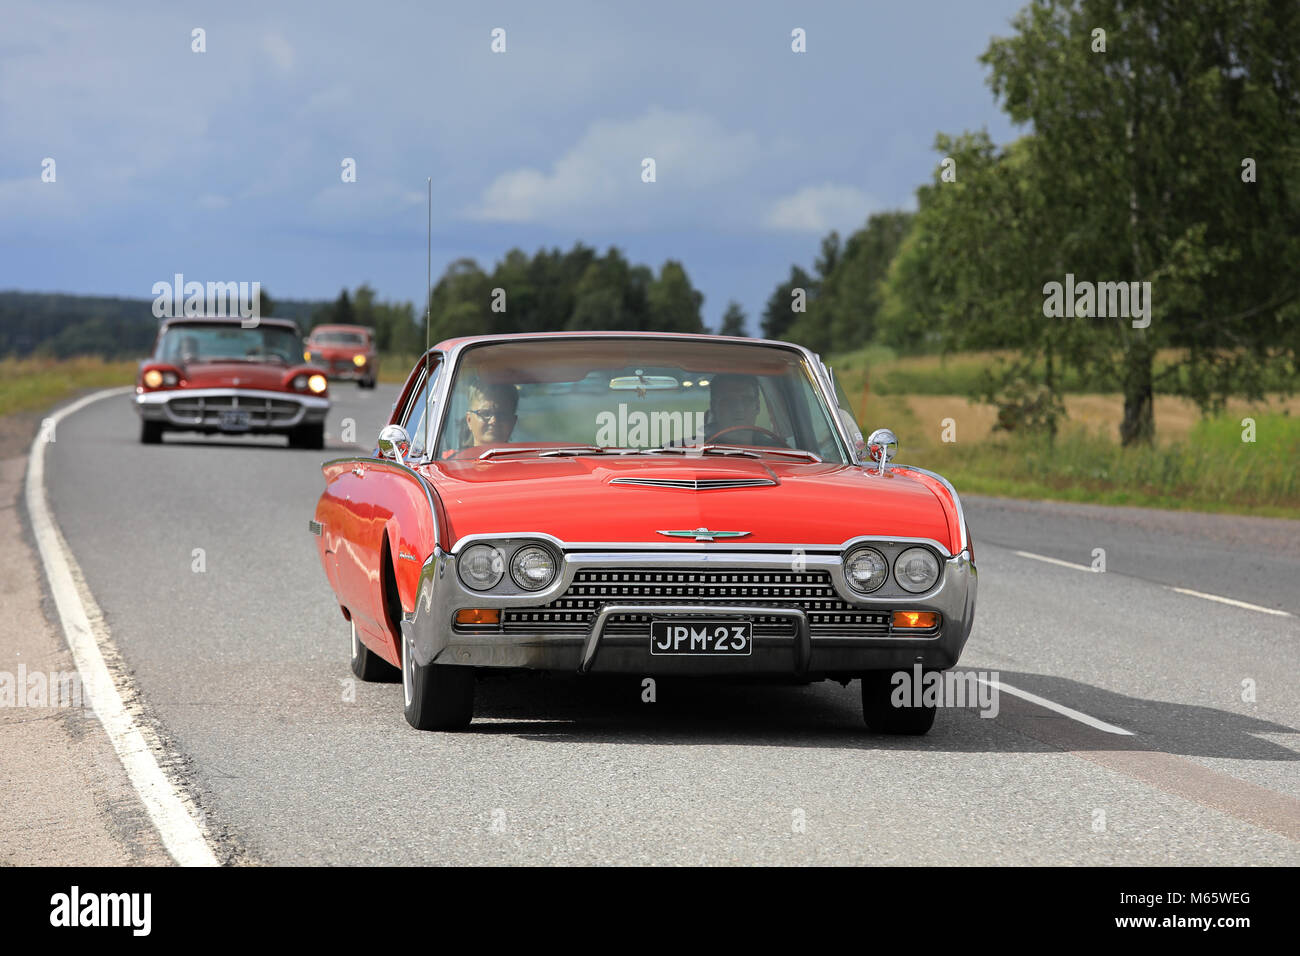 SOMERO, FINLAND - AUGUST 5, 2017: Red third generation (1961-1963) Ford Thunderbird classic car moves along rural highway on Maisemaruise 2017 car cru Stock Photo